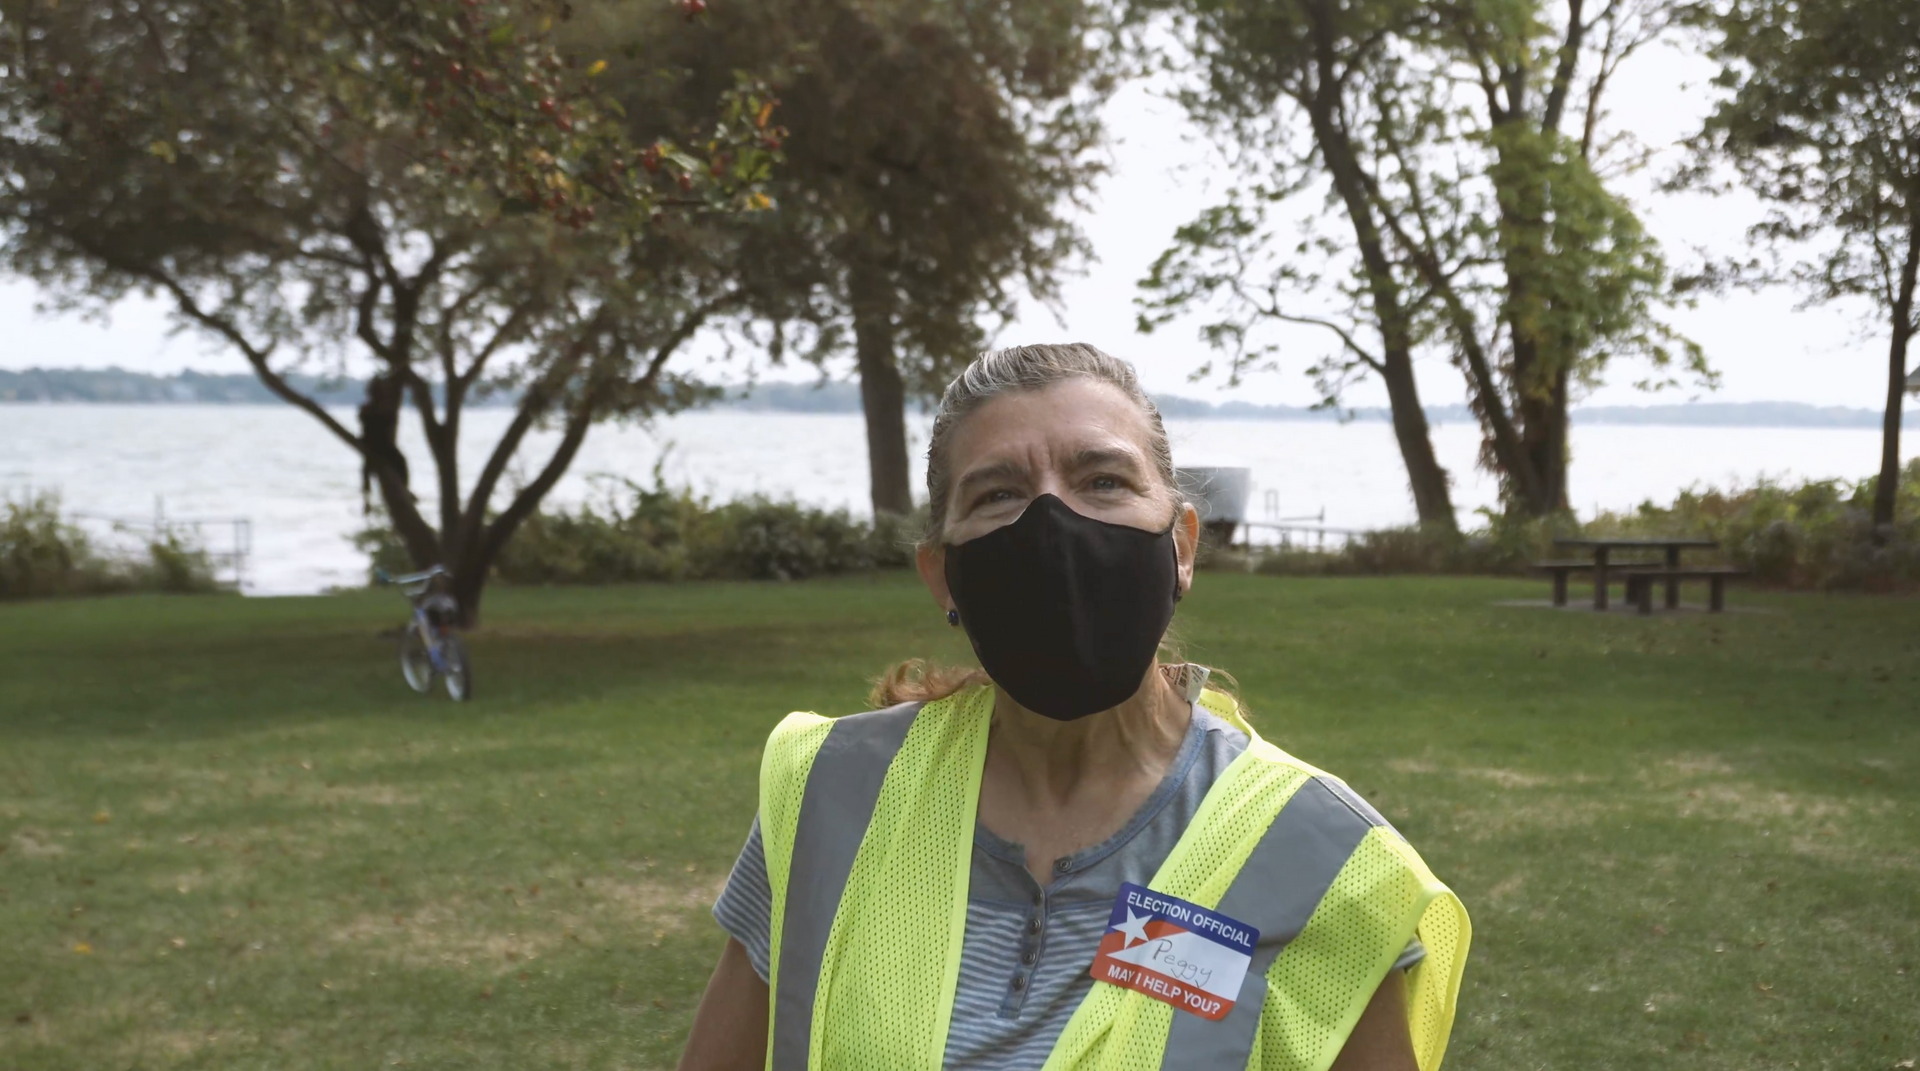 A woman in a yellow safety vest and black mask stands in a park and looks directly at the camera